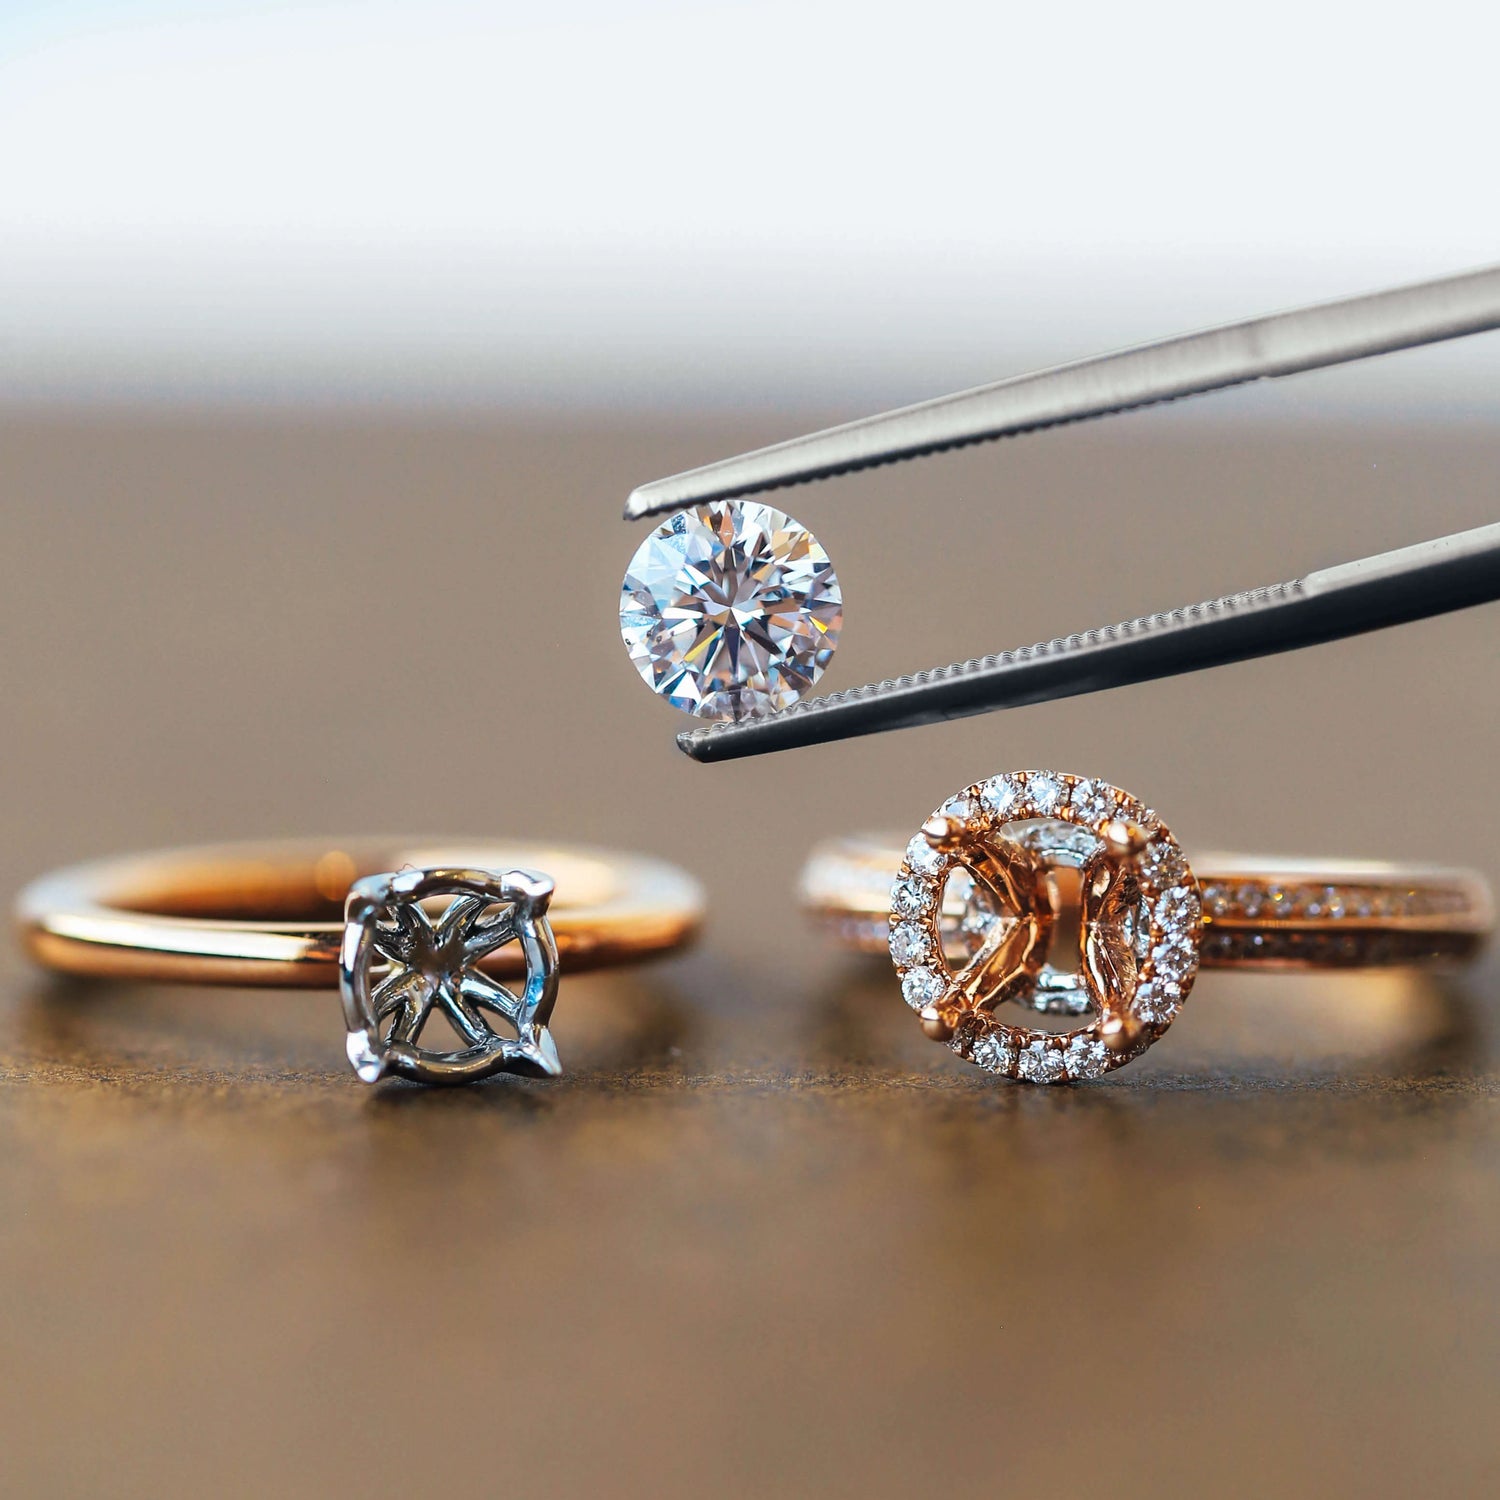 Best Engagement Rings for Fort Wayne Indiana - Melina Jewelry